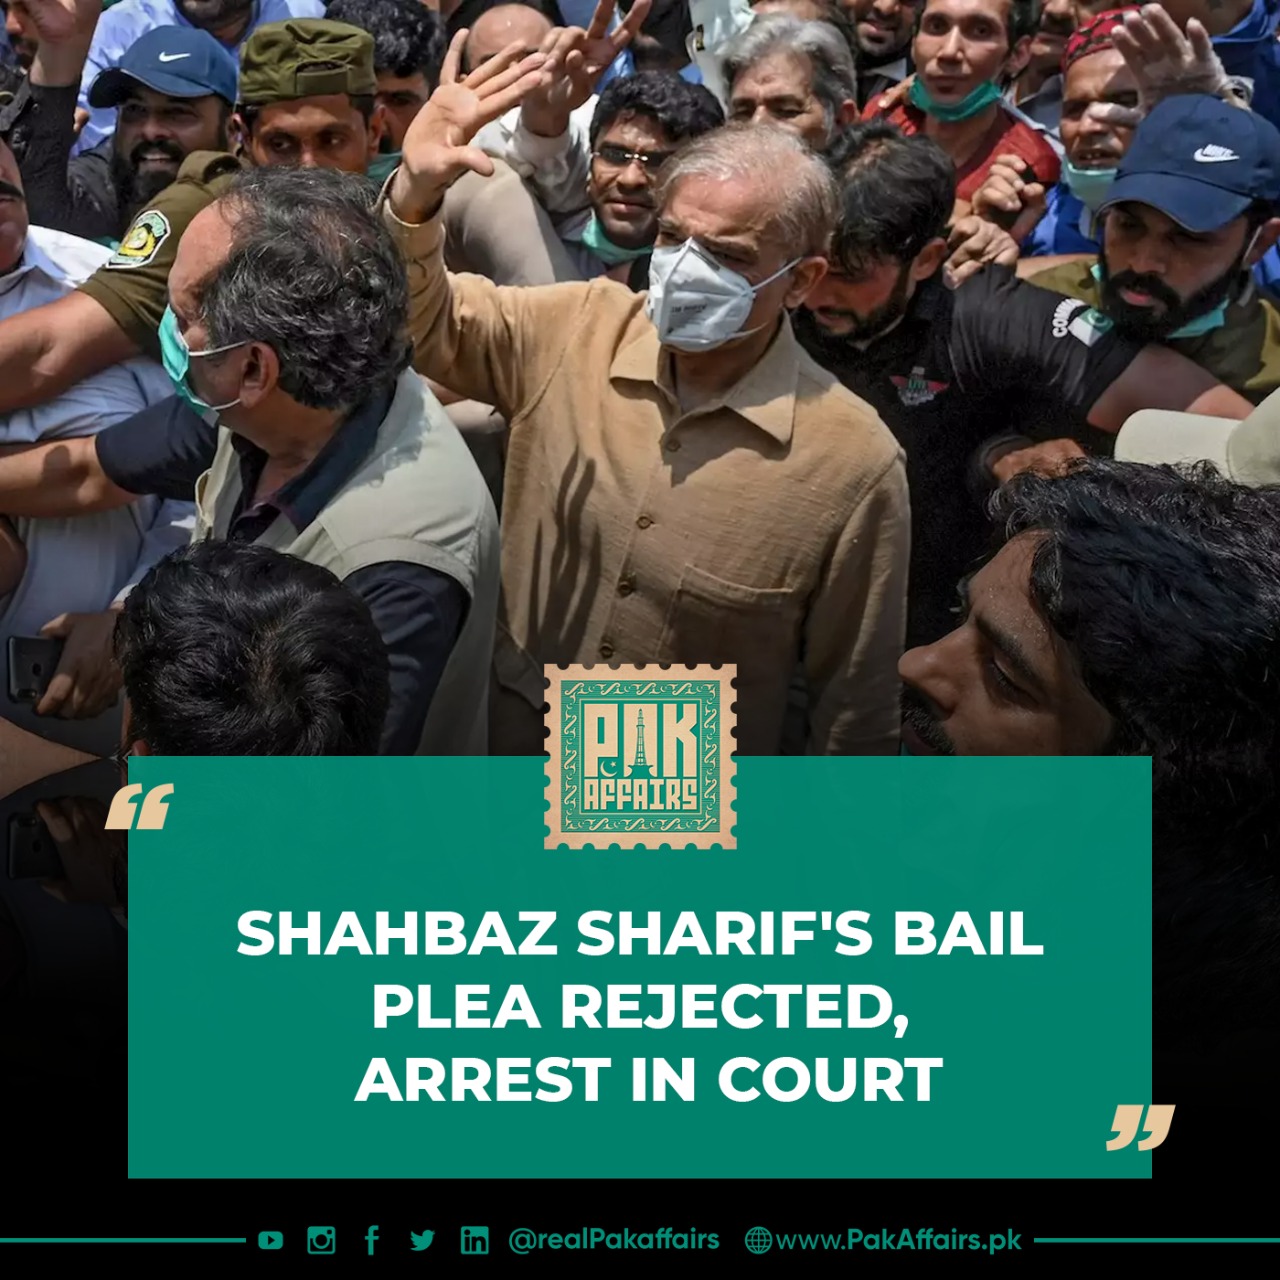 Shahbaz Sharif's bail plea rejected, arrested in court